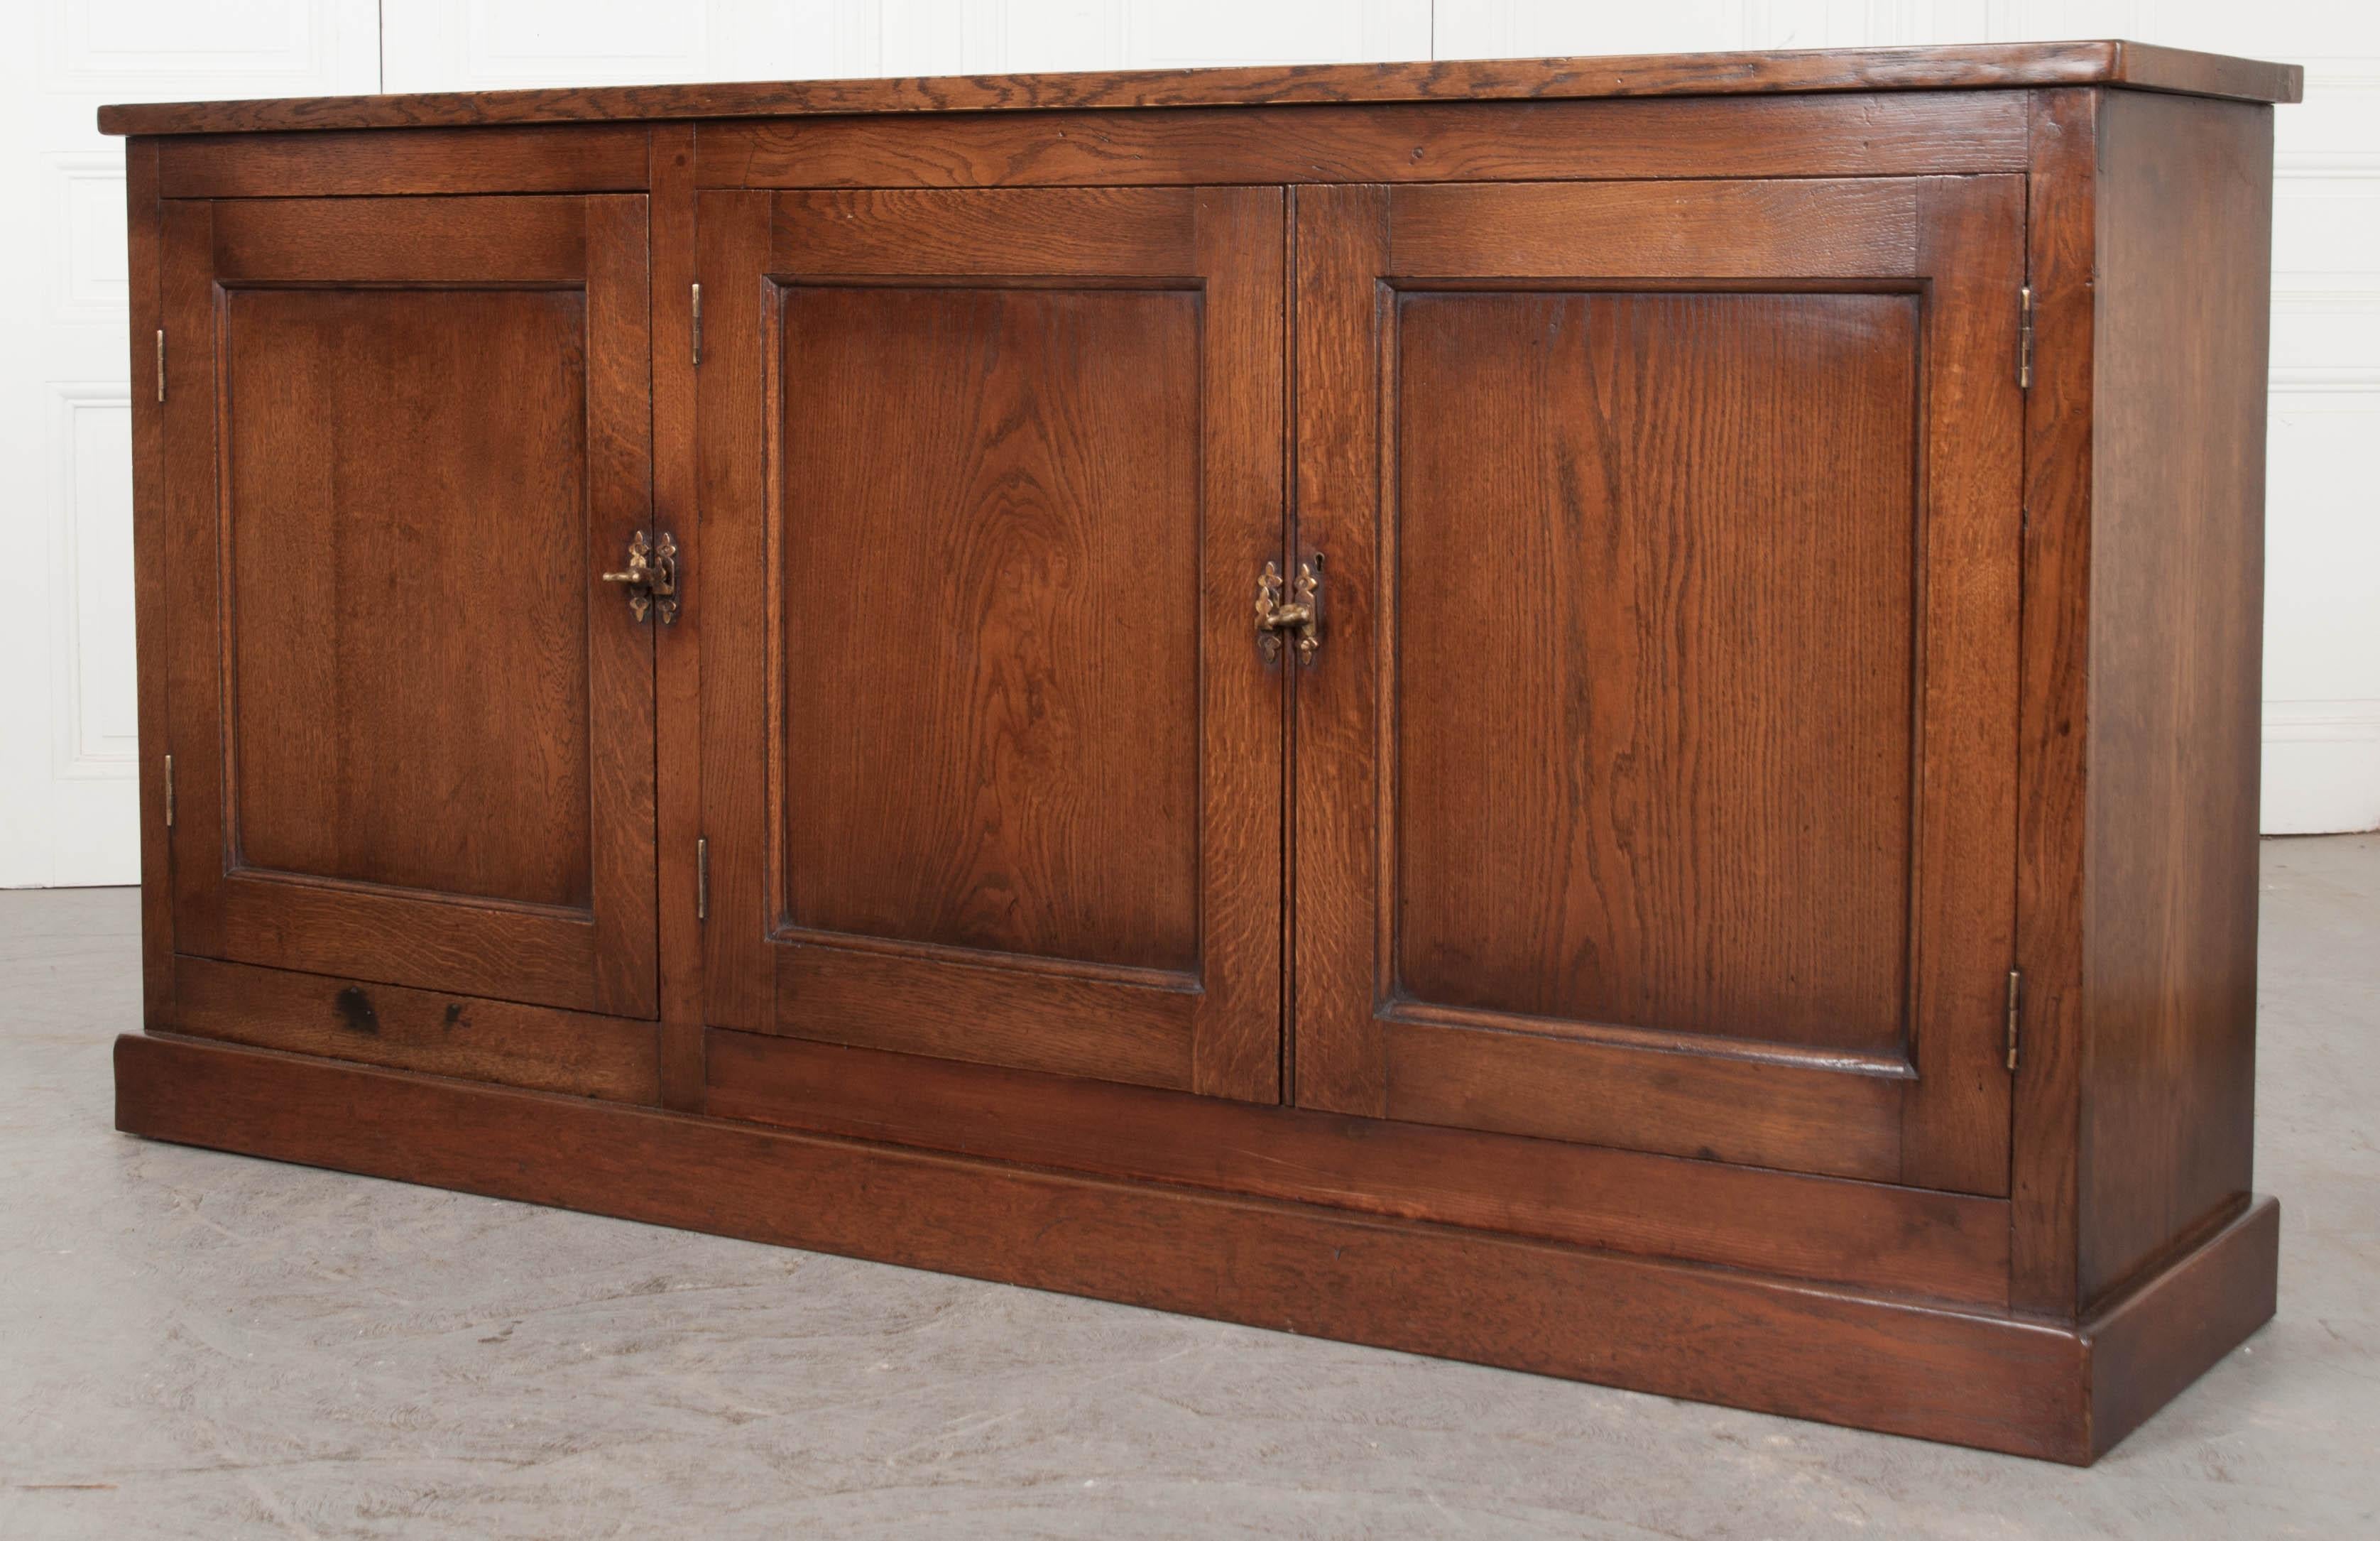 This fine English oak sideboard, circa 1900, offers plenty of storage yet its dimensions are perfect for smaller spaces. The three paneled doors, with brass latches and a single escutcheon (the key lacking) open to reveal a single removable shelf.